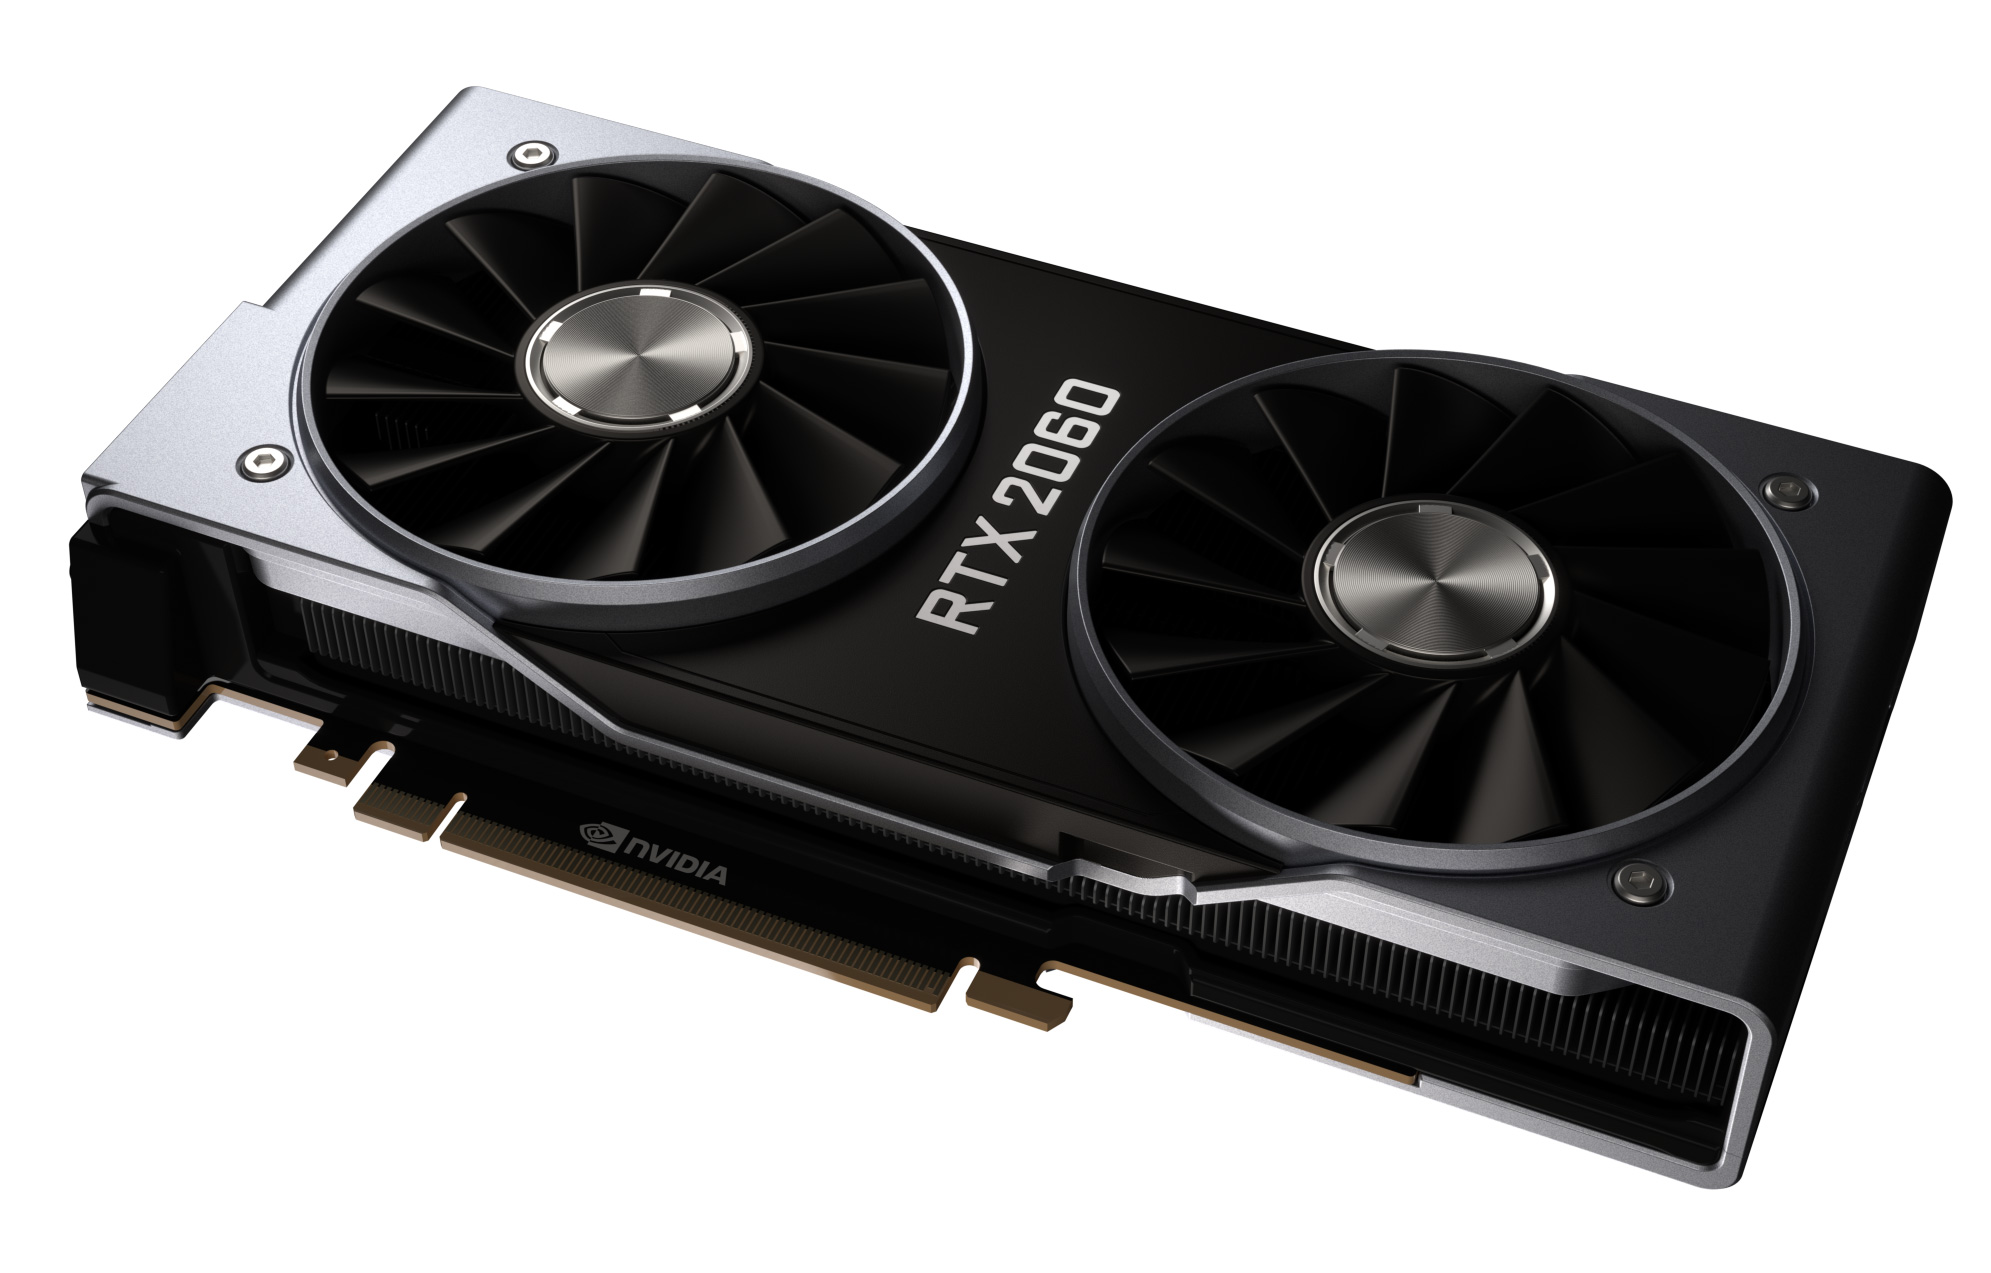 Closing Thoughts - The NVIDIA GeForce RTX 2060 6GB Founders